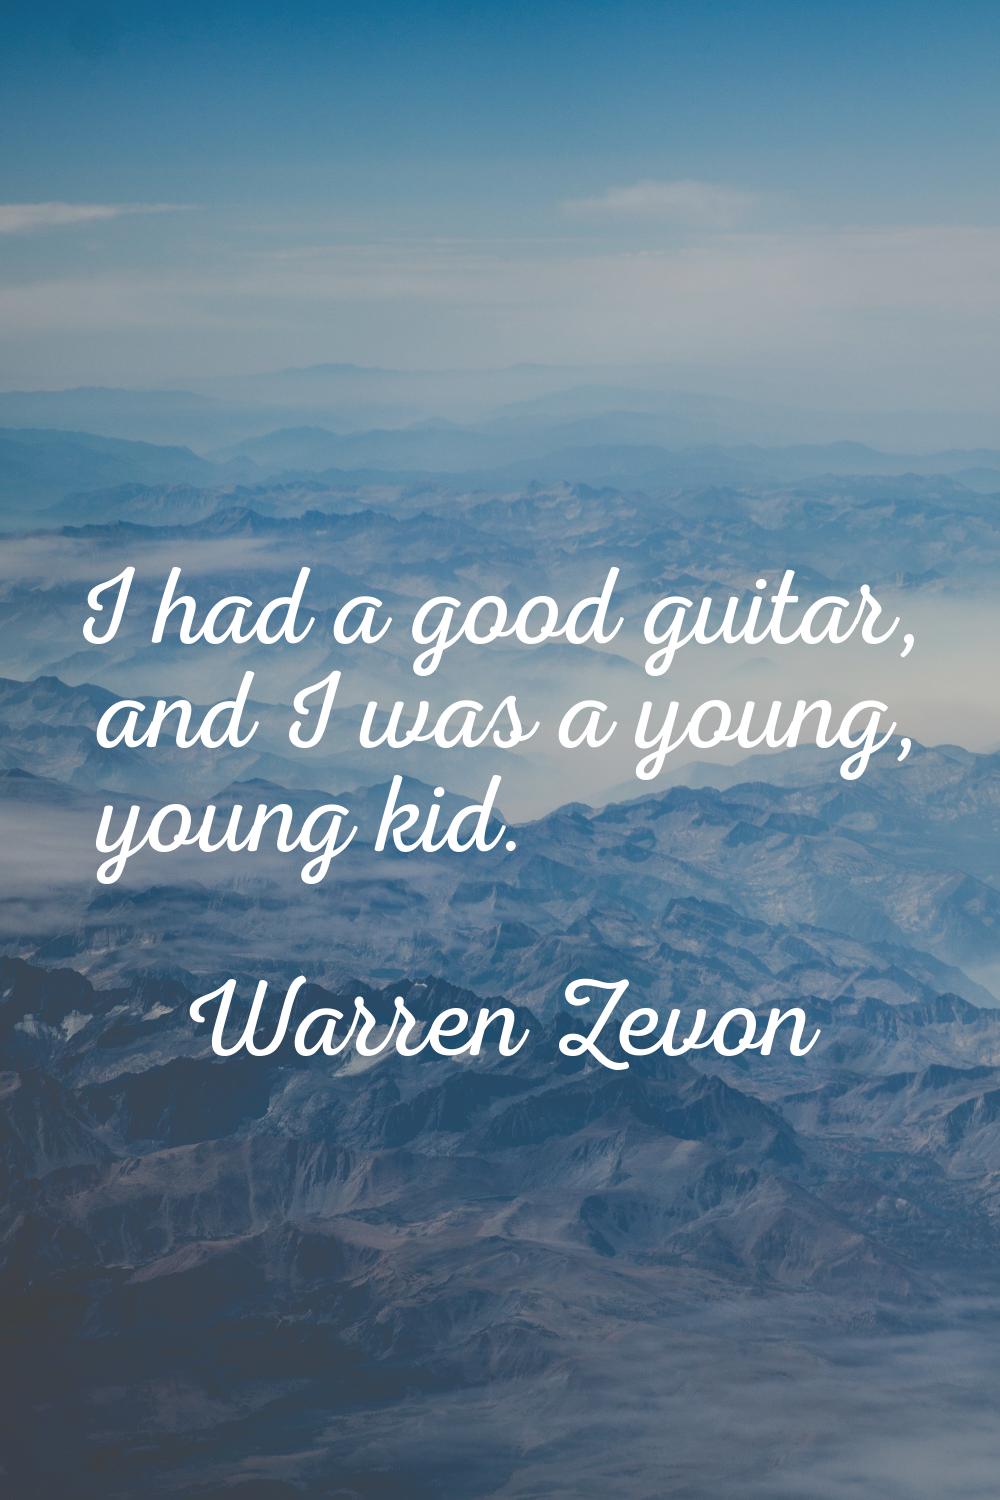 I had a good guitar, and I was a young, young kid.